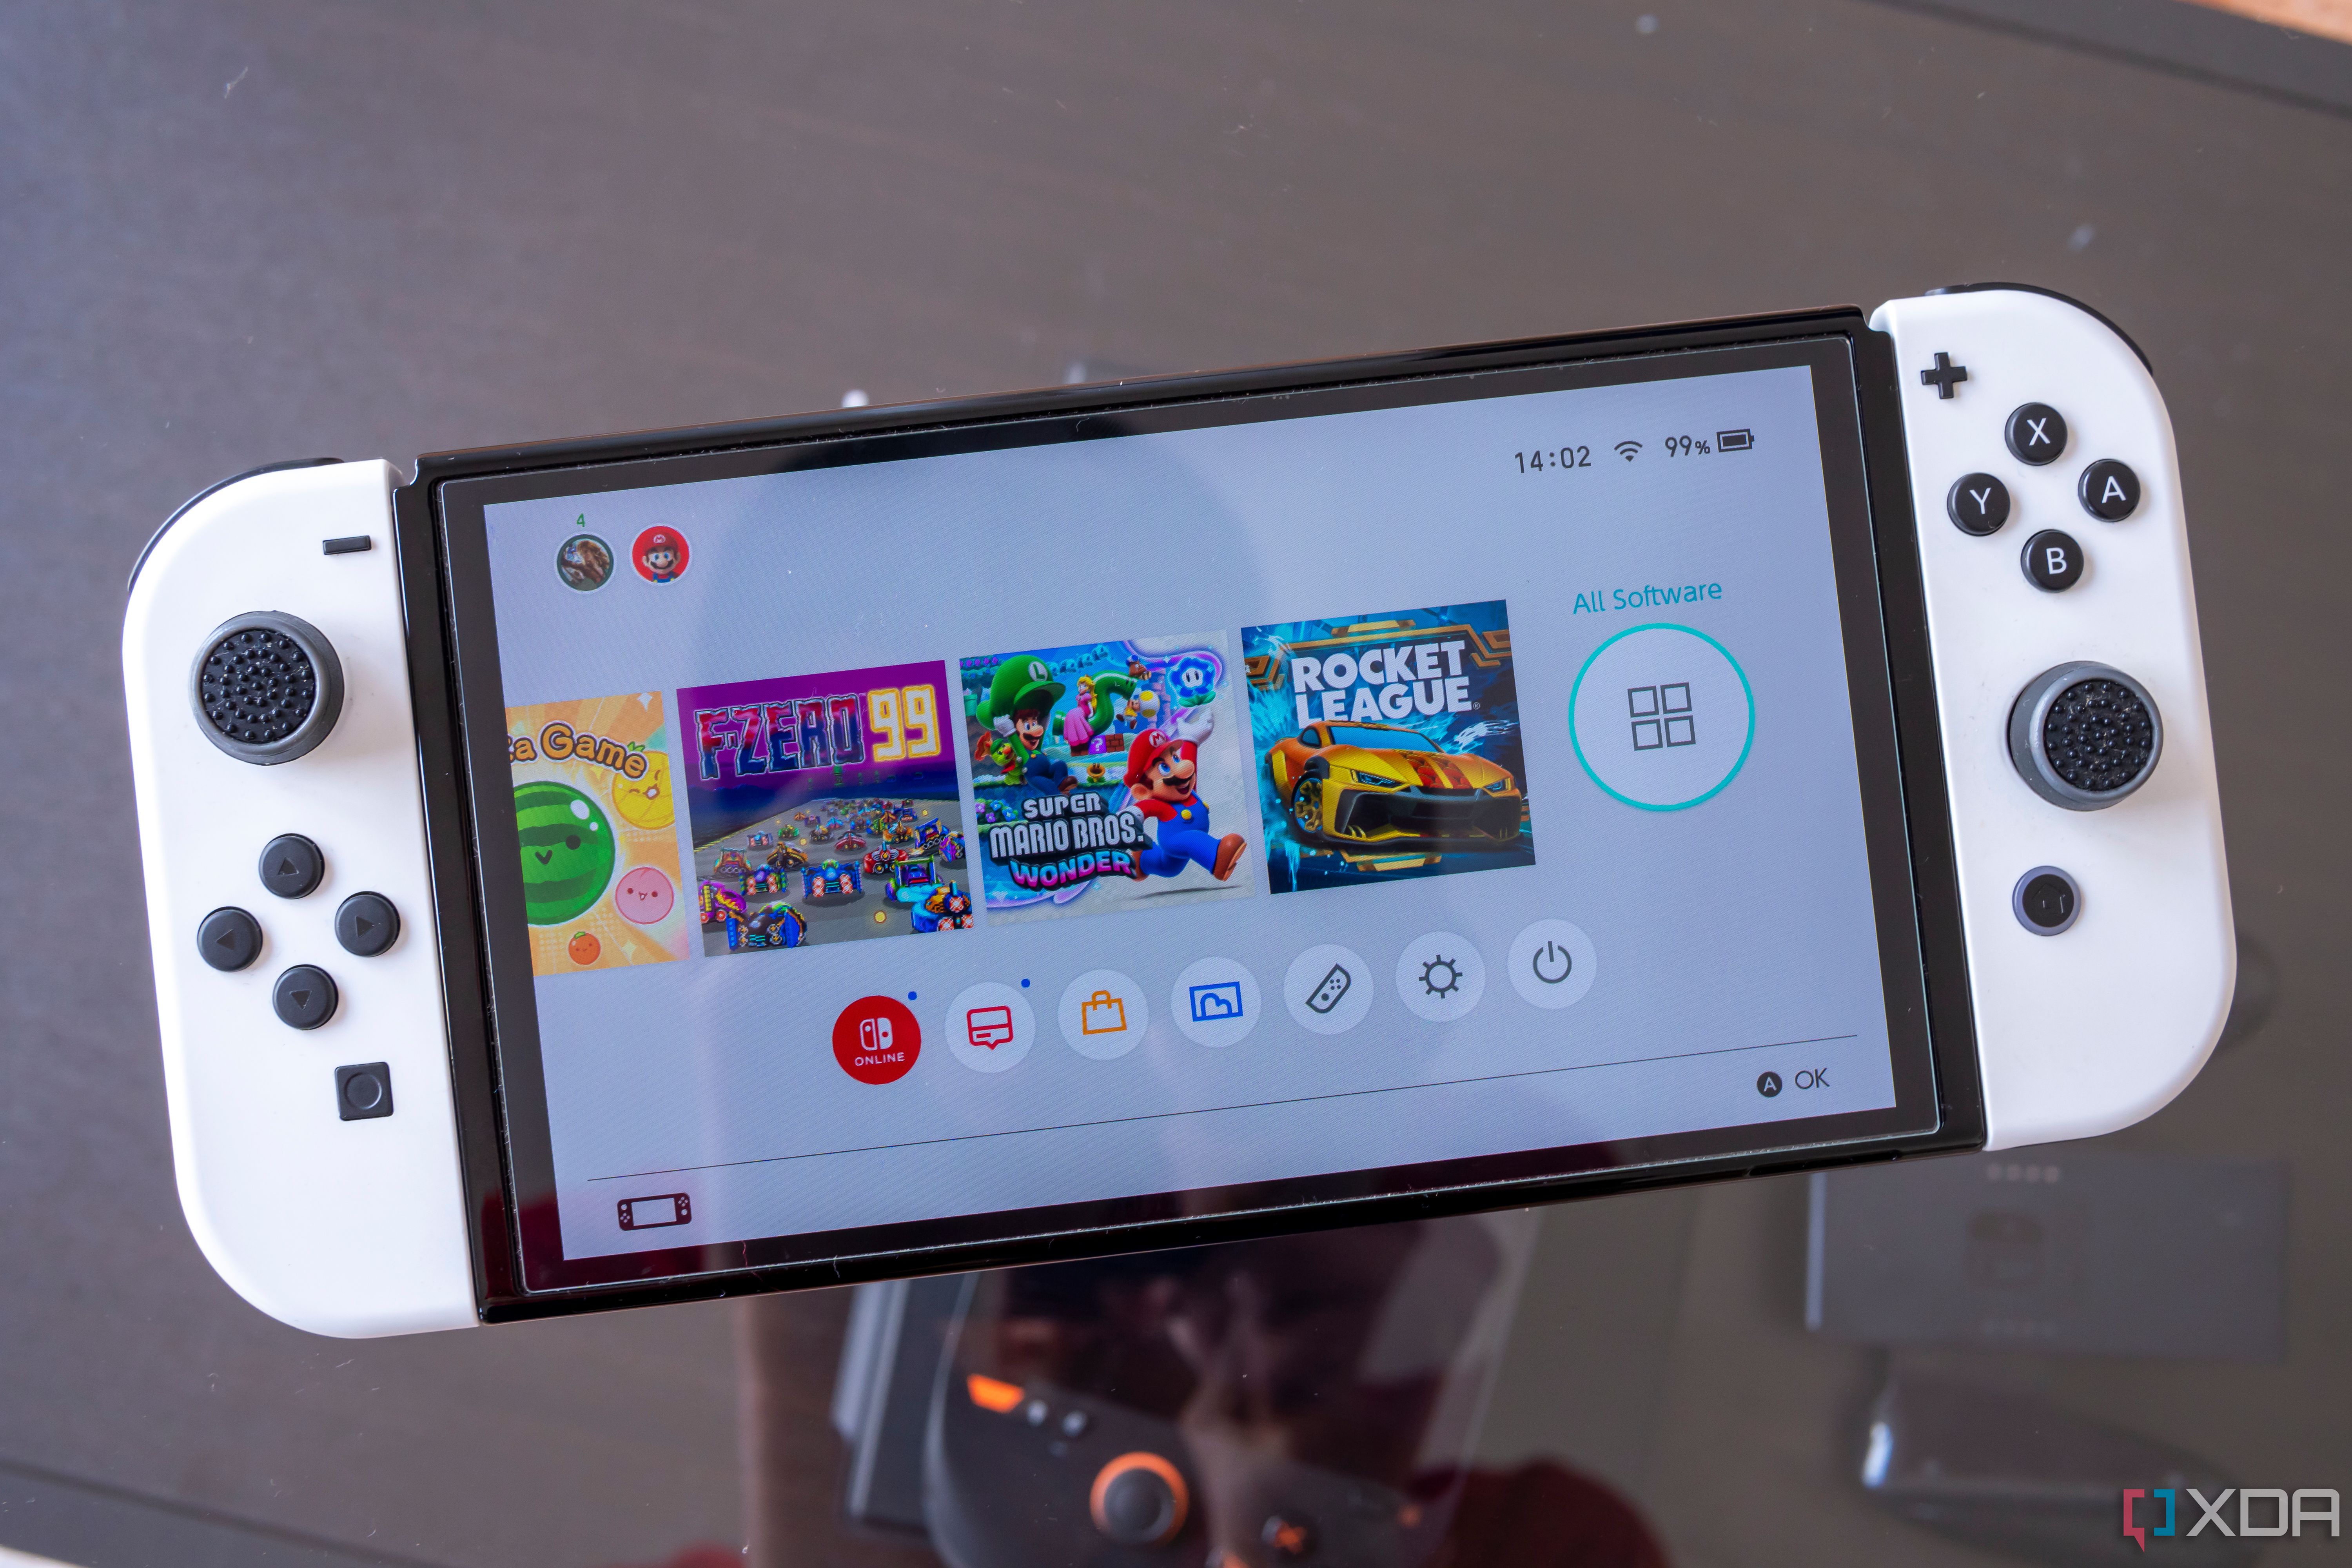 The Wii U's Best Feature Isn't Coming To The Nintendo Switch